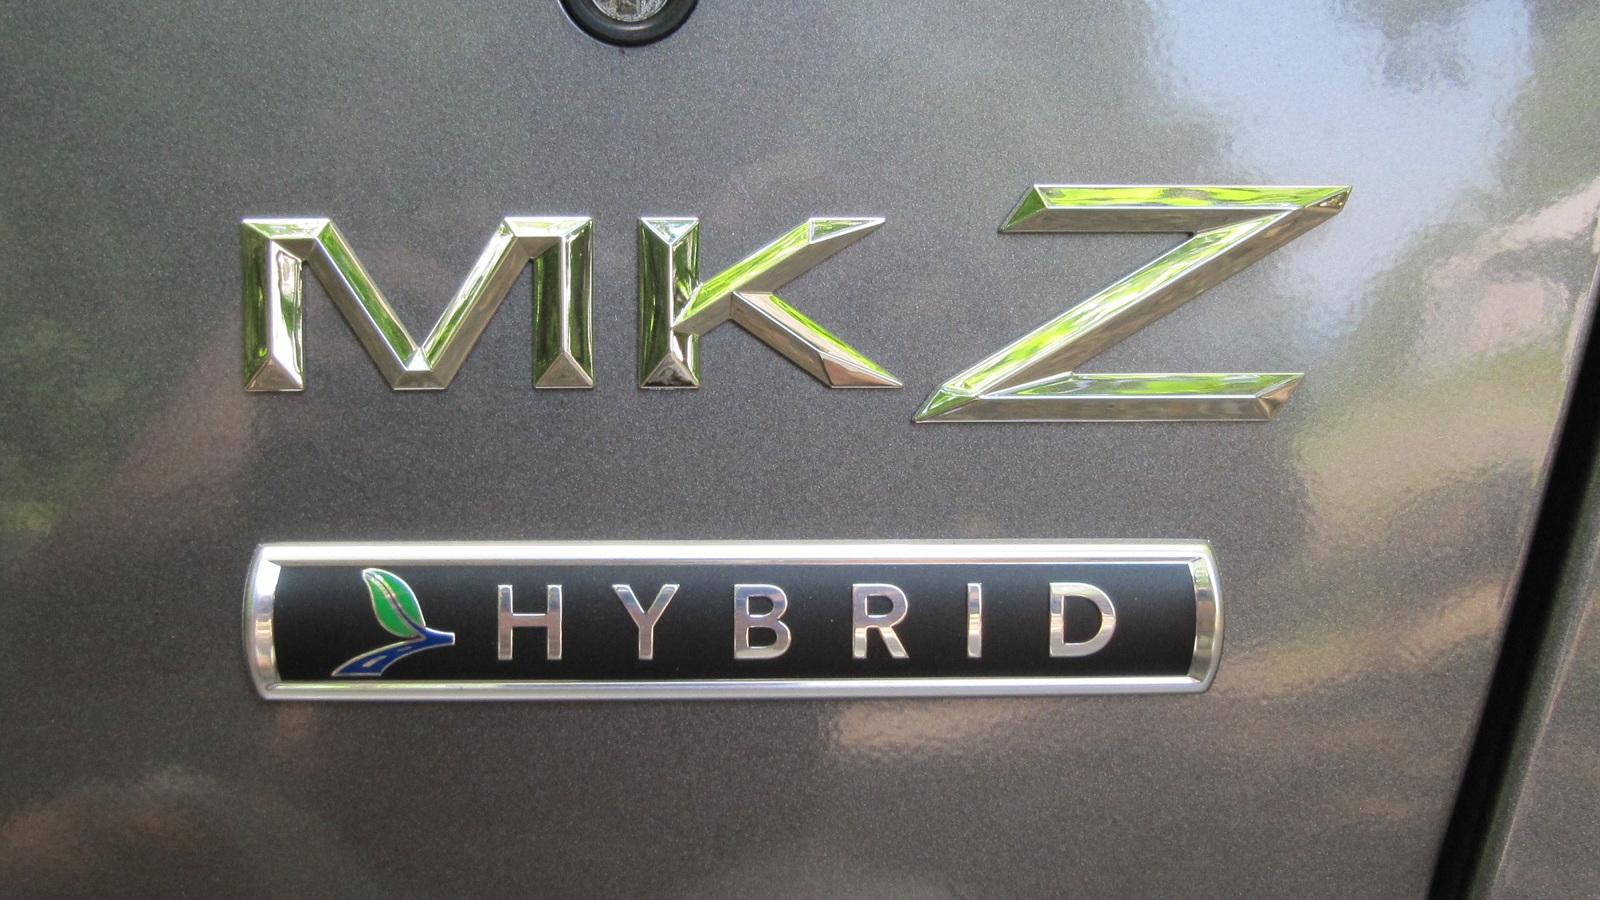 2011 Lincoln MKZ Hybrid on test in upstate New York, July 2011